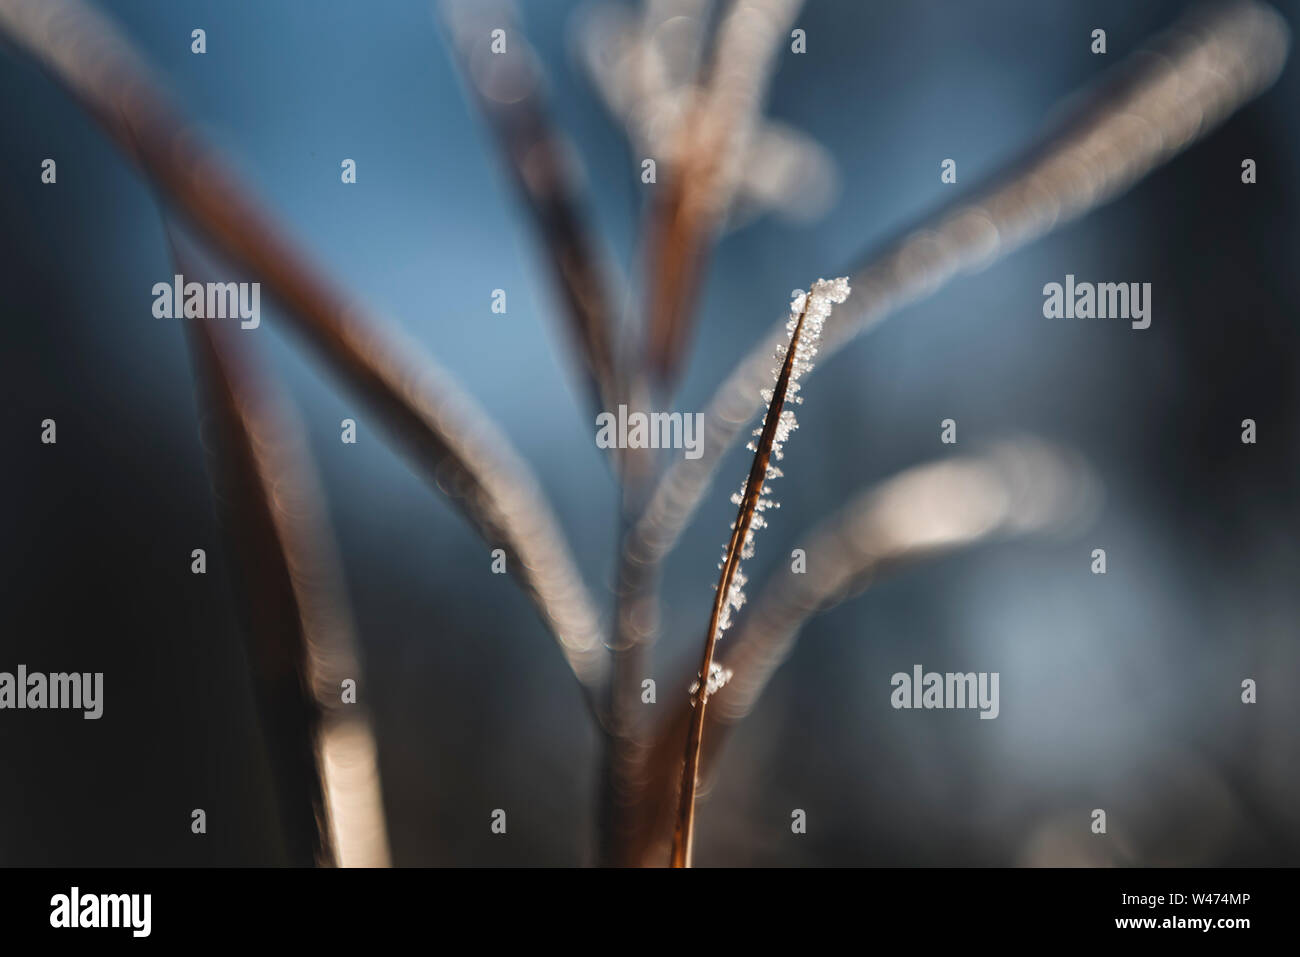 Up close Frosty Blade of Grass during Winter Stock Photo